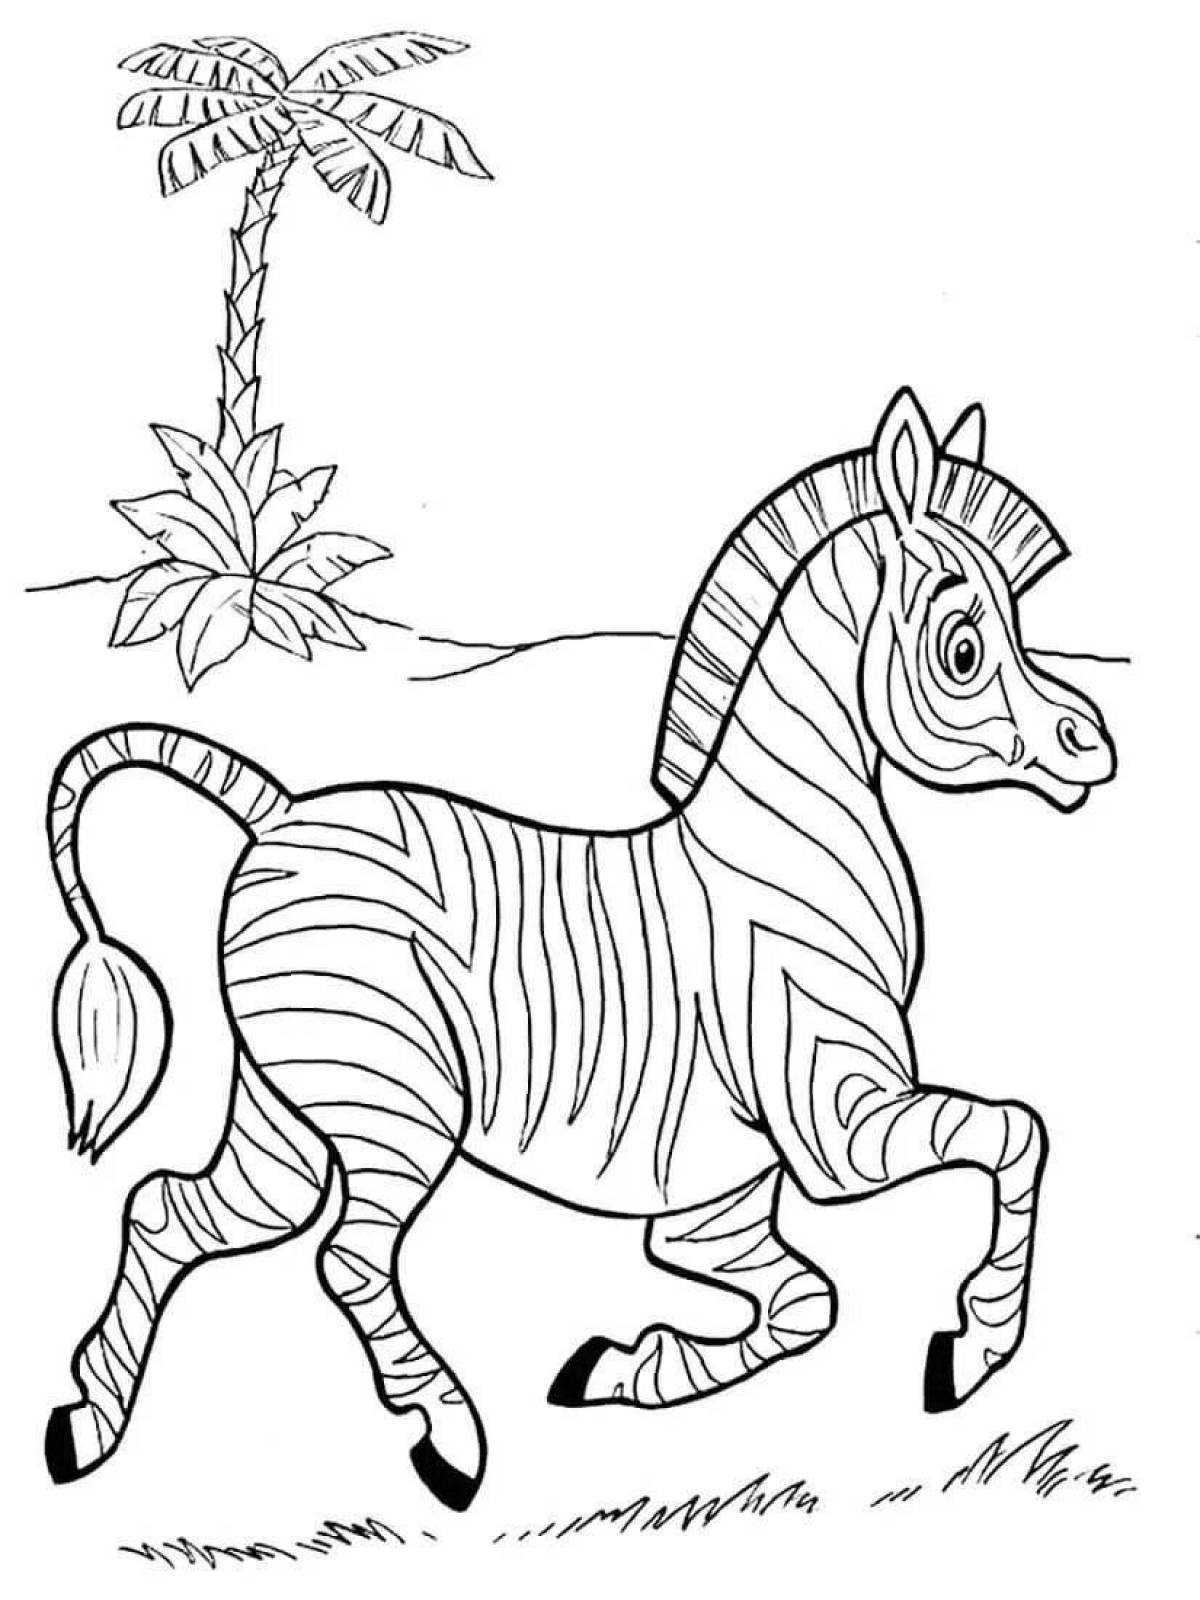 Fun zebra coloring book for 3-4 year olds